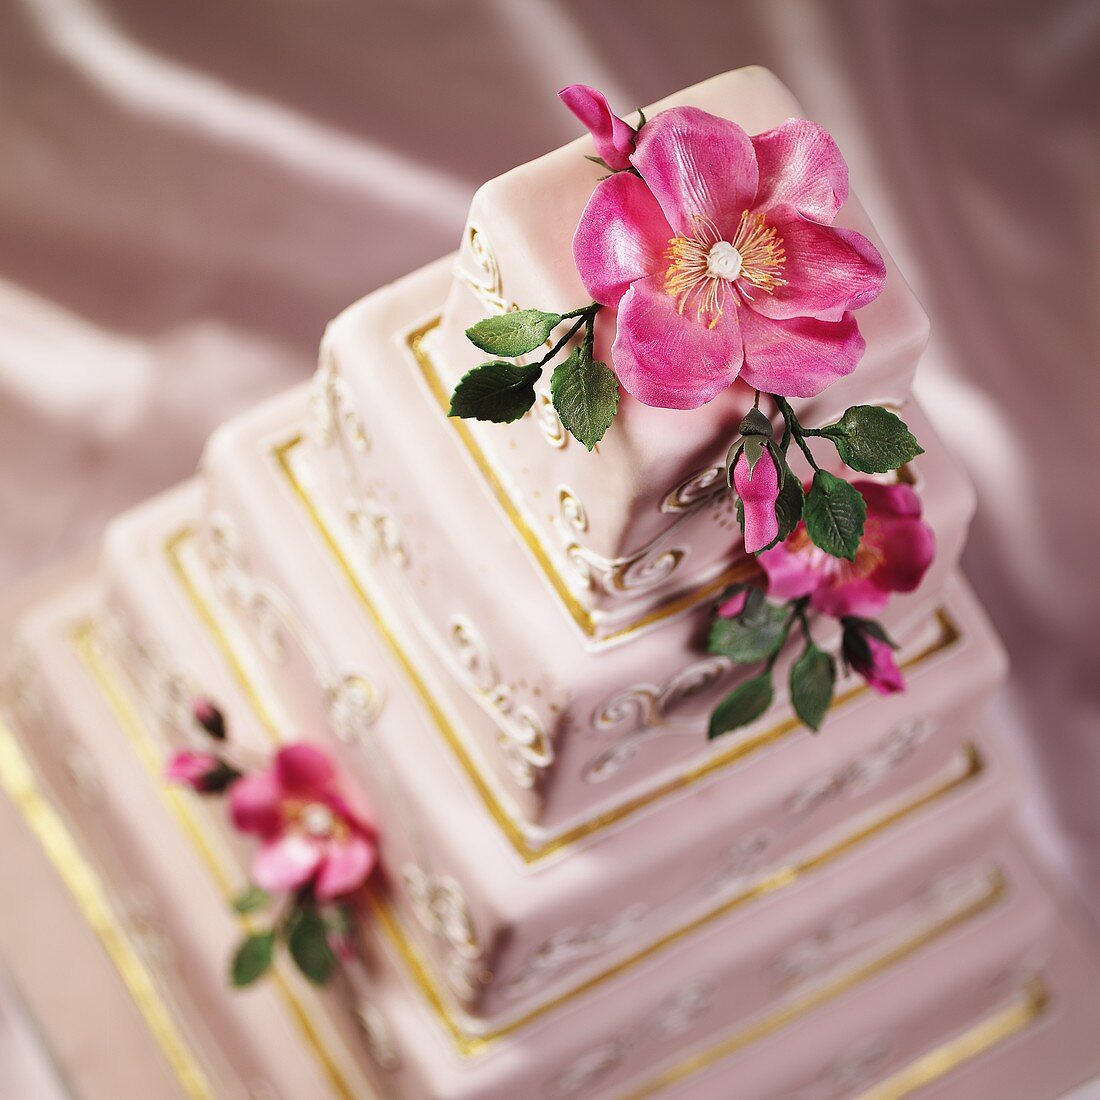 A Multi-tiered Wedding Cake with Pink Flowers